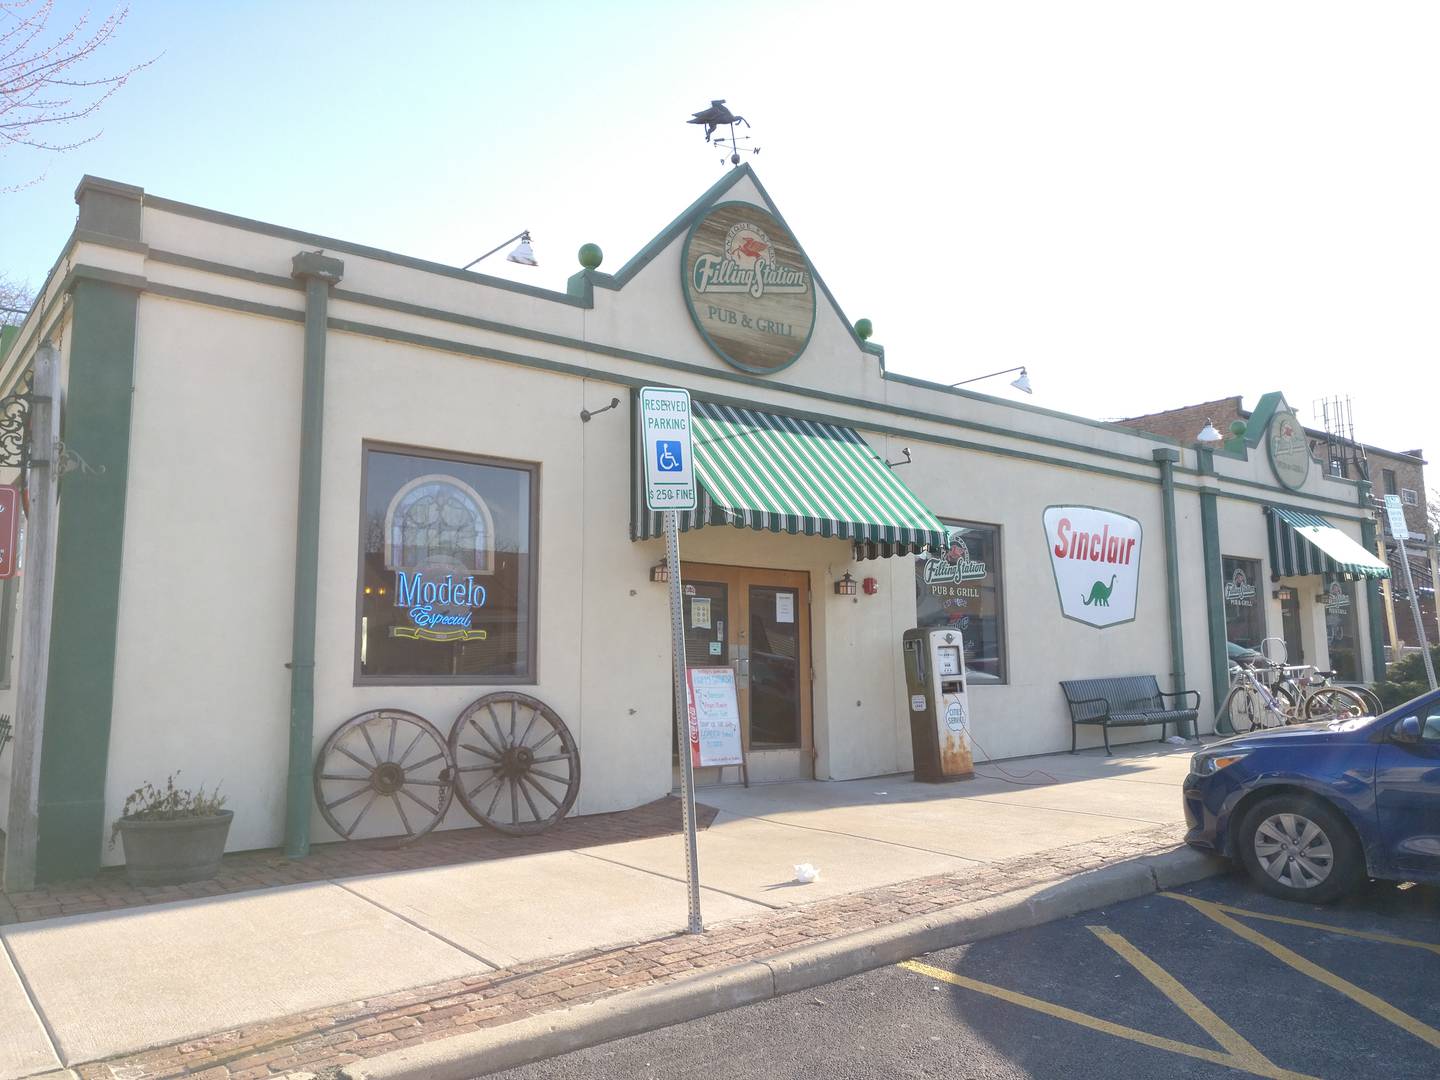 The Filling Station Pub & Grill is an institution in downtown St. Charles.